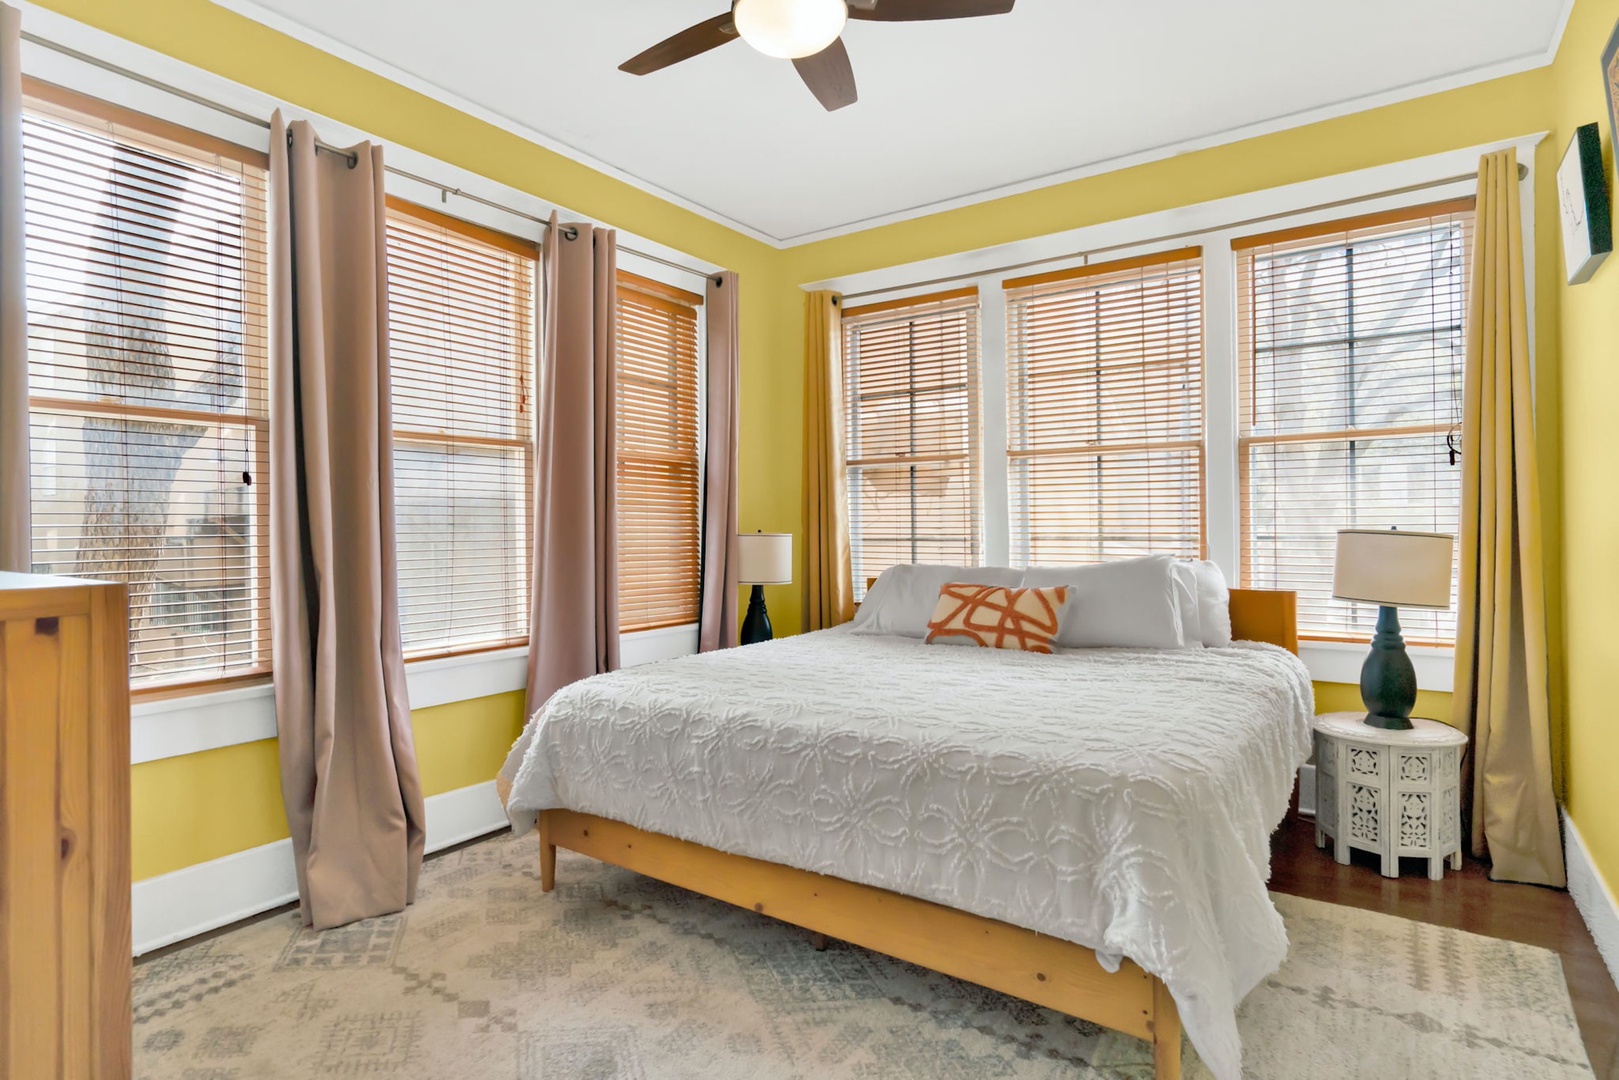 The second bedroom sanctuary features lots of windows & a cozy king bed